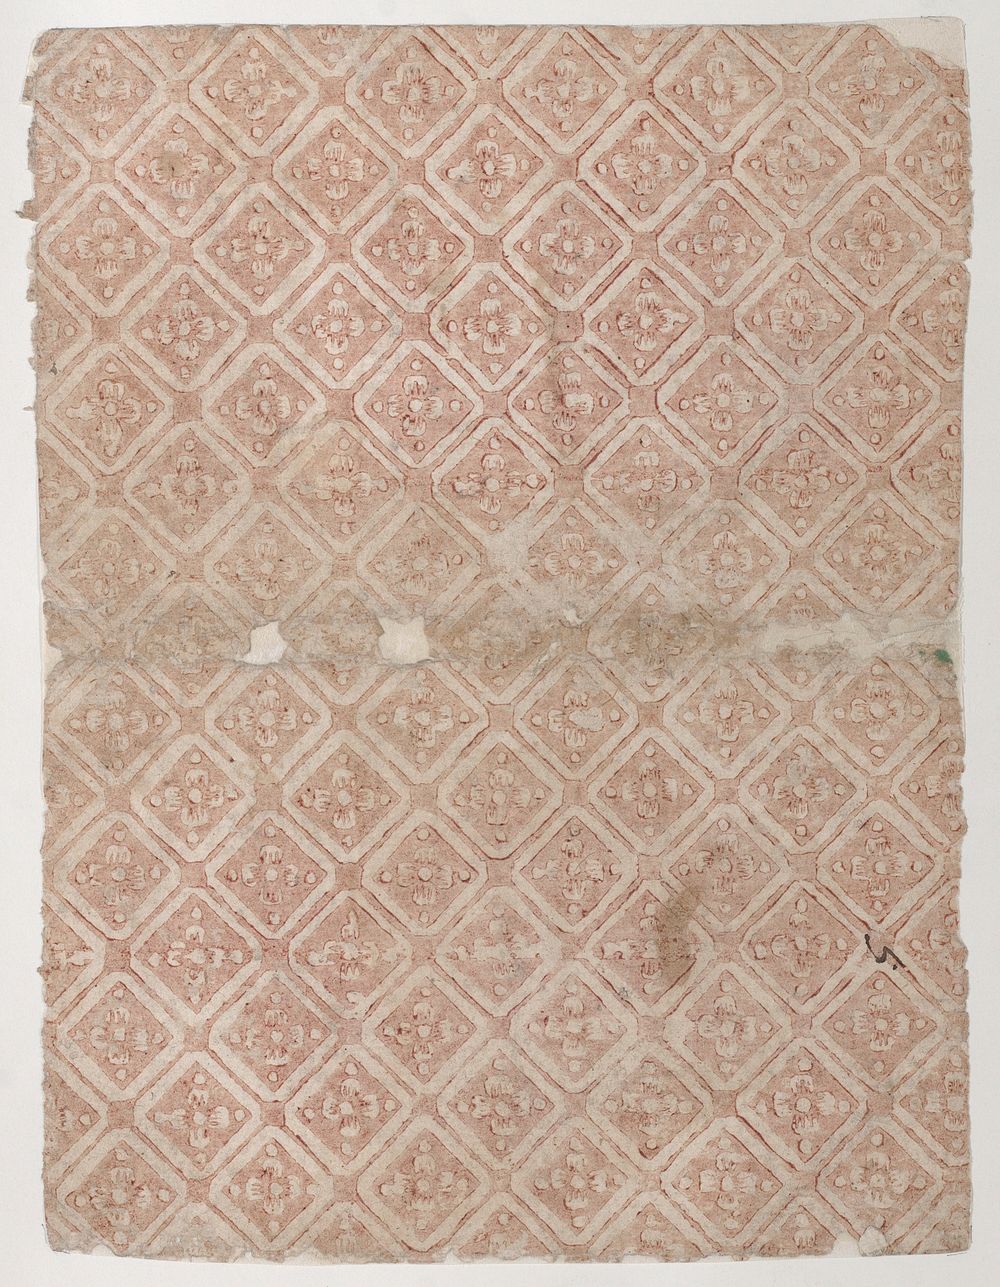 Book cover with overall pattern of diamonds with rosettes